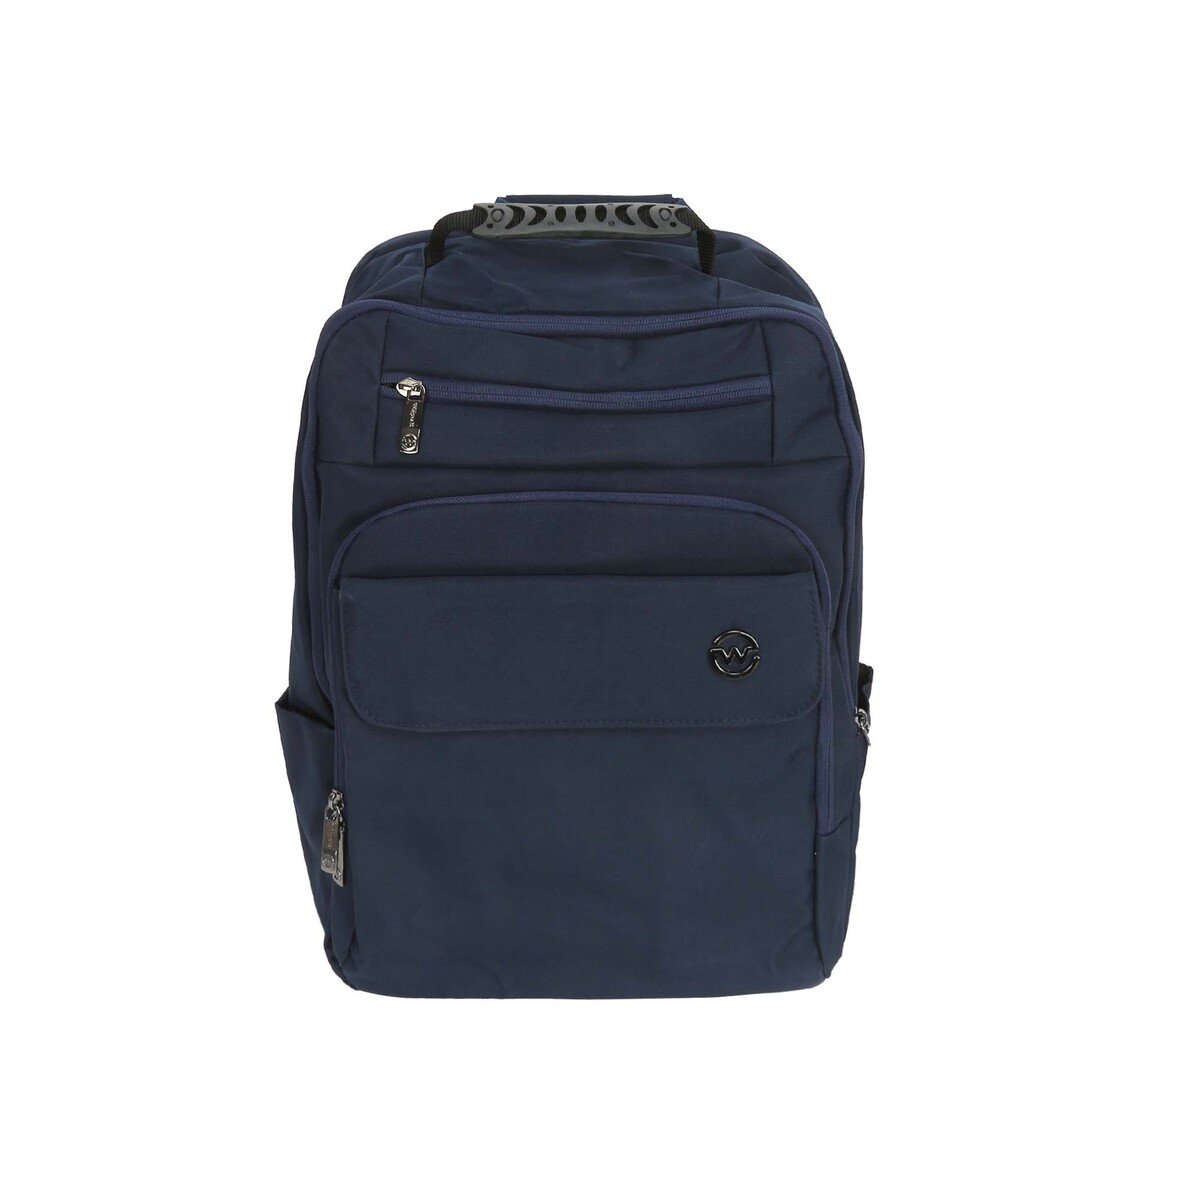 Wagon R Laptop Backpack BP-1780 Assorted